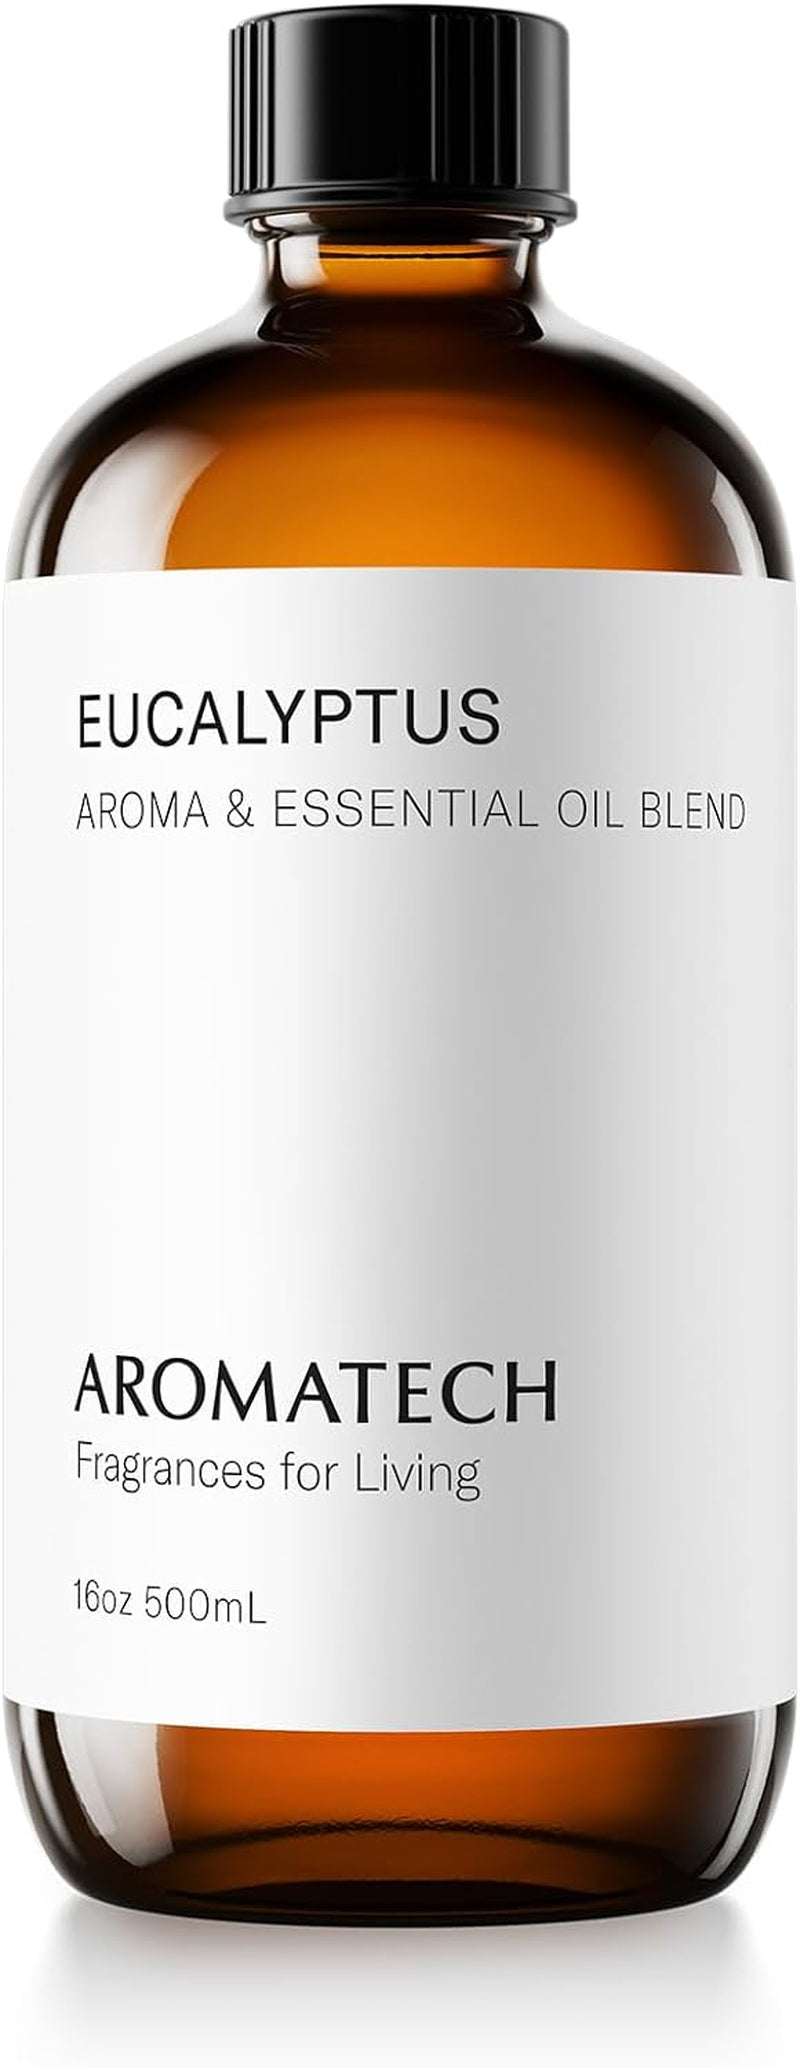 Eucalyptus Aroma Oil for Scent Diffuser - Luxurious Aroma Essential Oils Blend of Eucalyptus, Rosemary, White Citrus, Sweet Ylang Ylang, and Cedar Wood Fragrance Oil for Diffuser - 500Ml